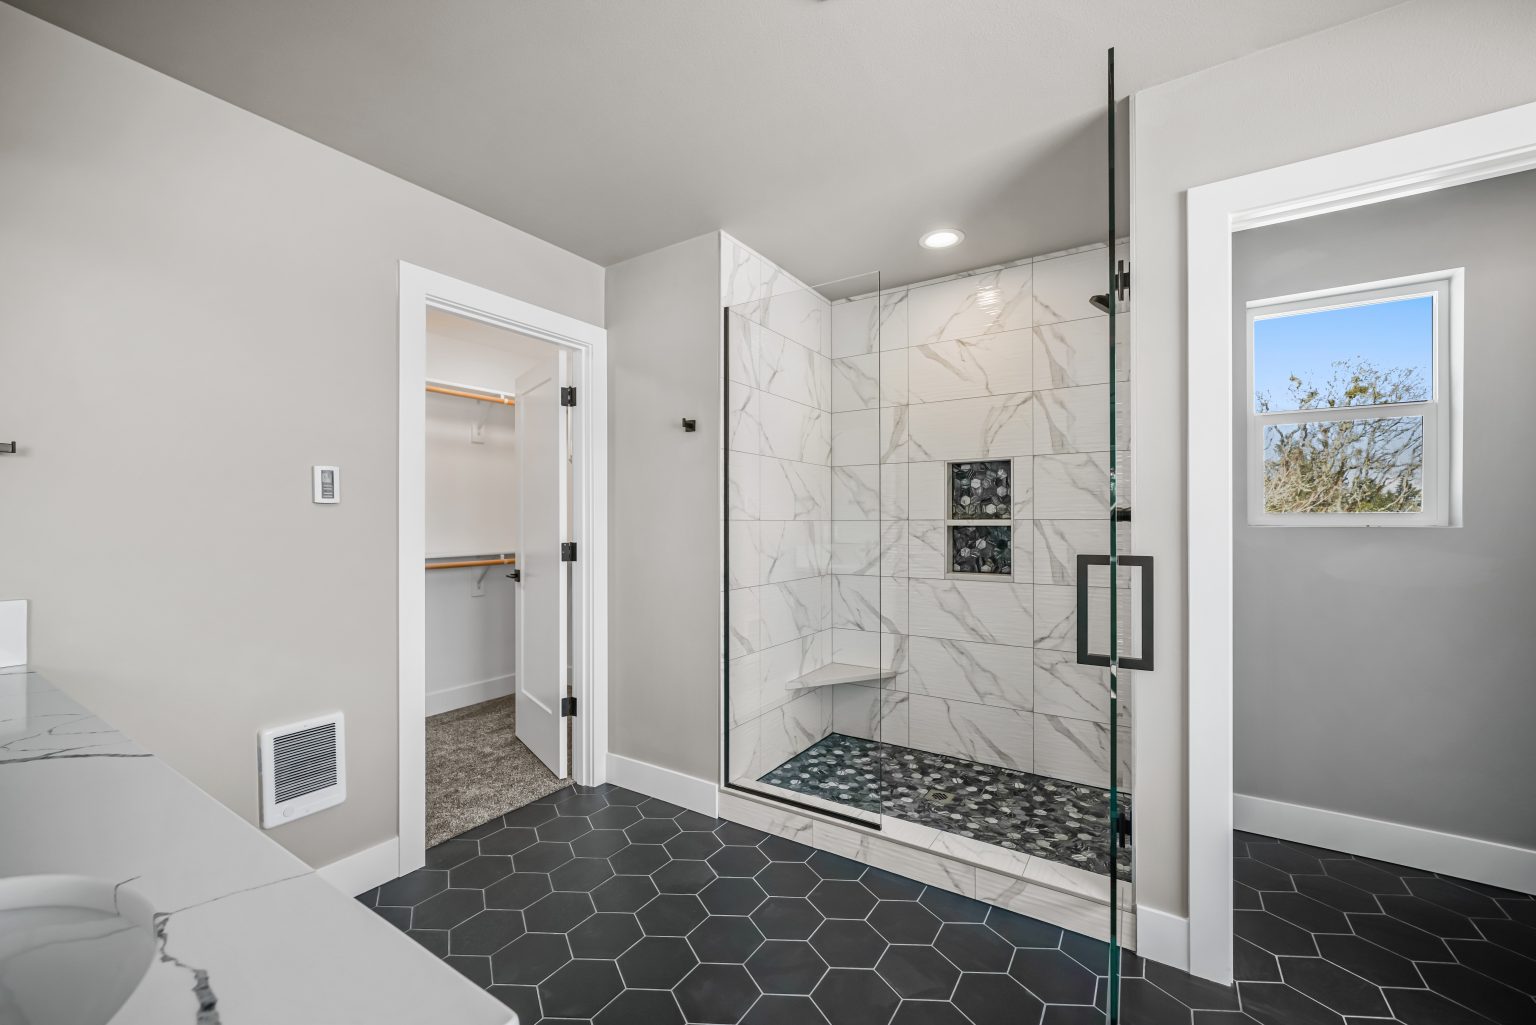 large bathroom with a standing shower that has a glass door and horizontal white marble tiles with gray veining, honeycomb dark floor tiles, bathroom sink and walk in closet